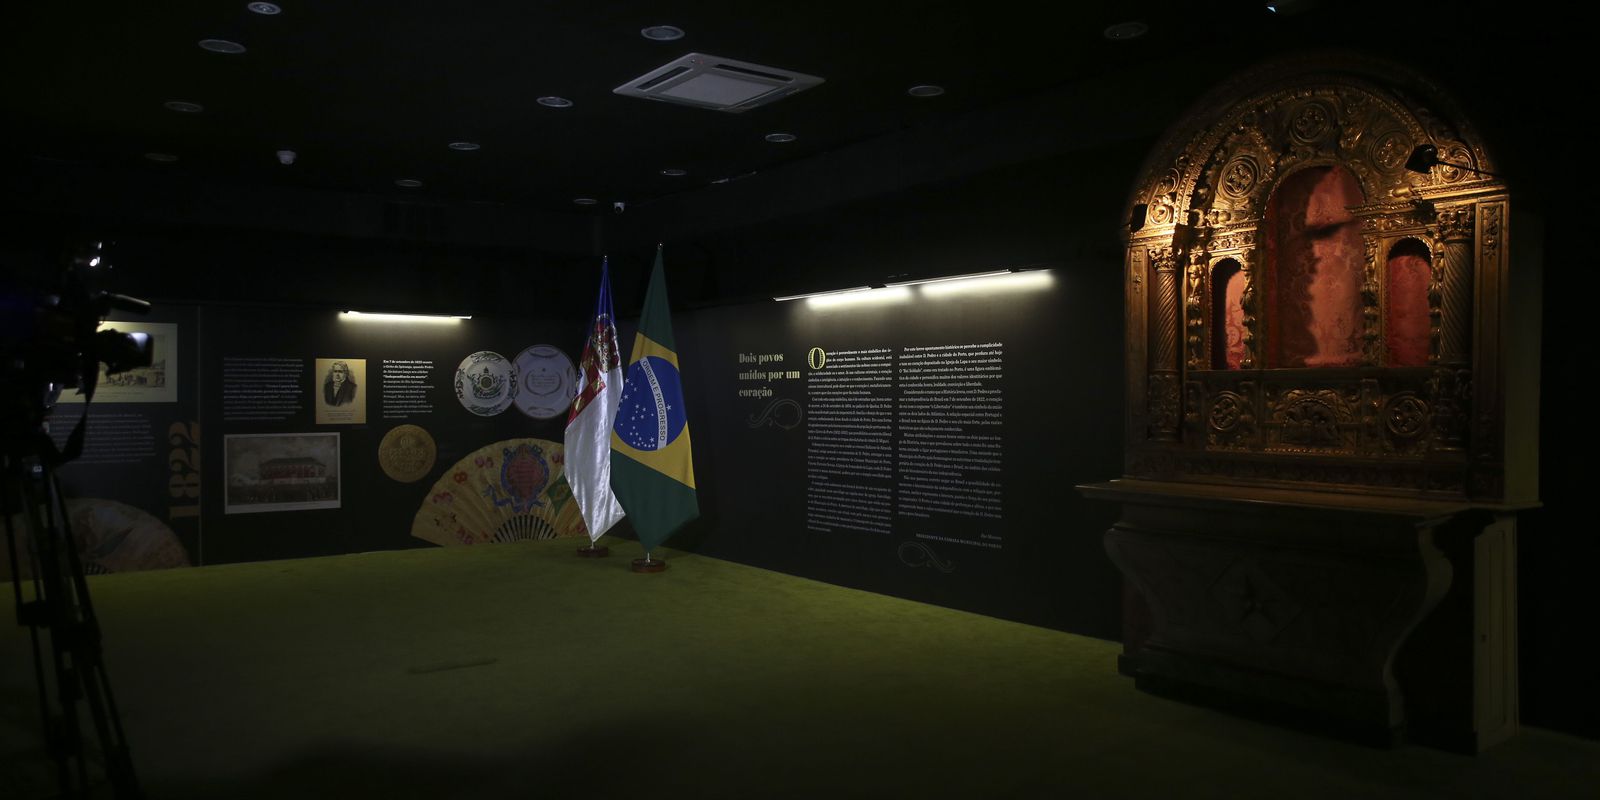 Brazil will have the heart of D. Pedro I in the celebrations of independence